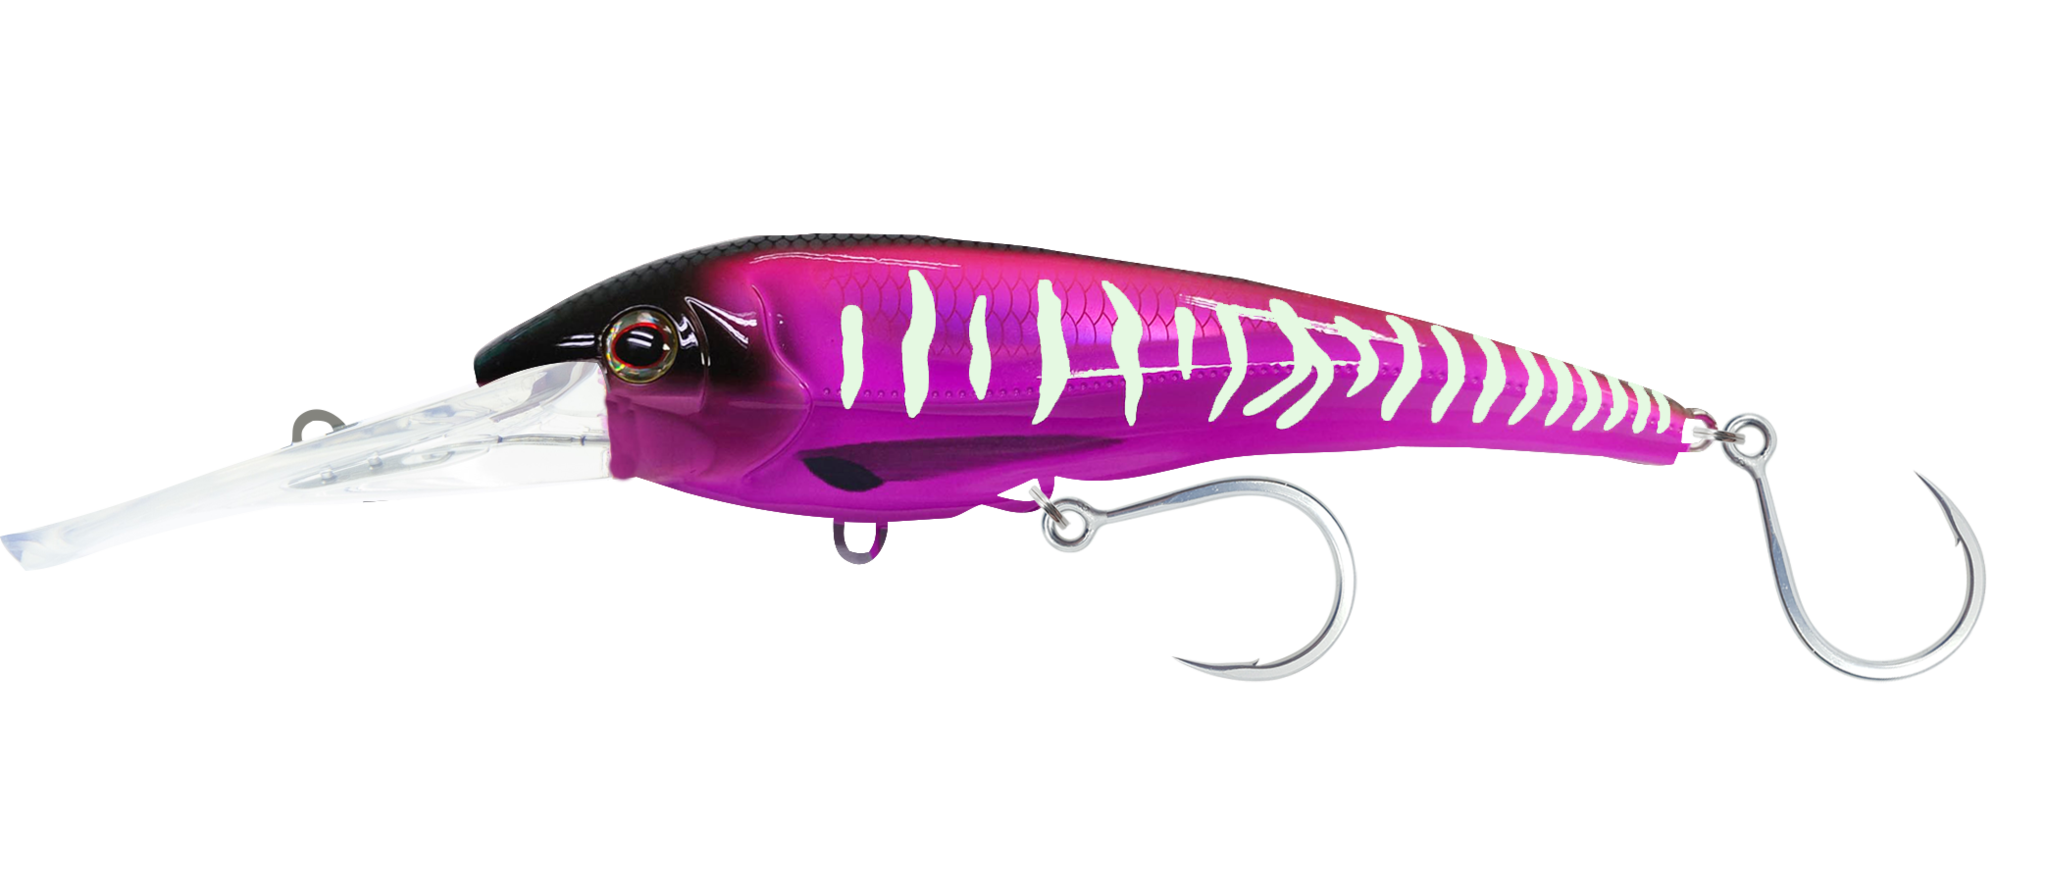 Nomad - DTX Minnow Sinking 200 - 8 Lure